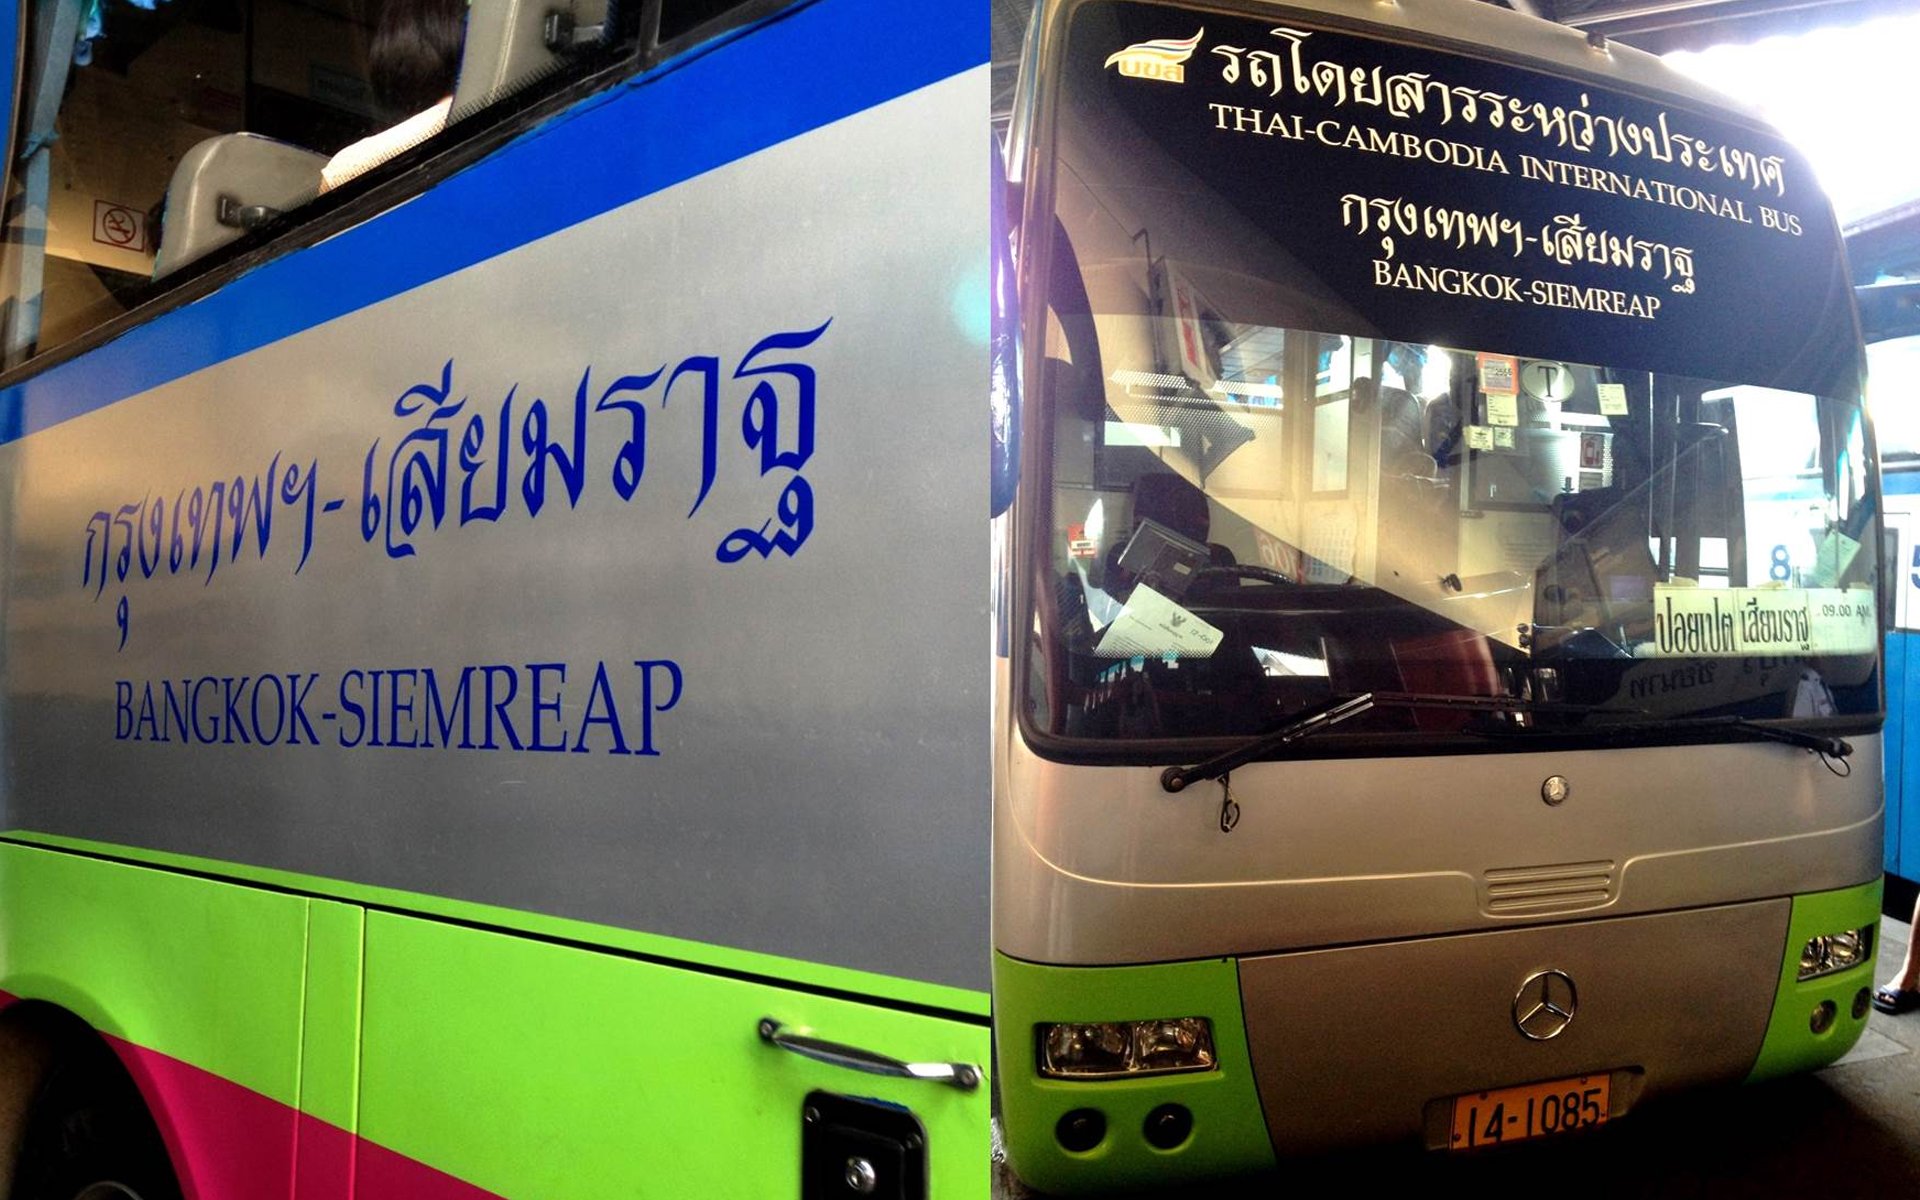 By bus from Bangkok to Siem Reap